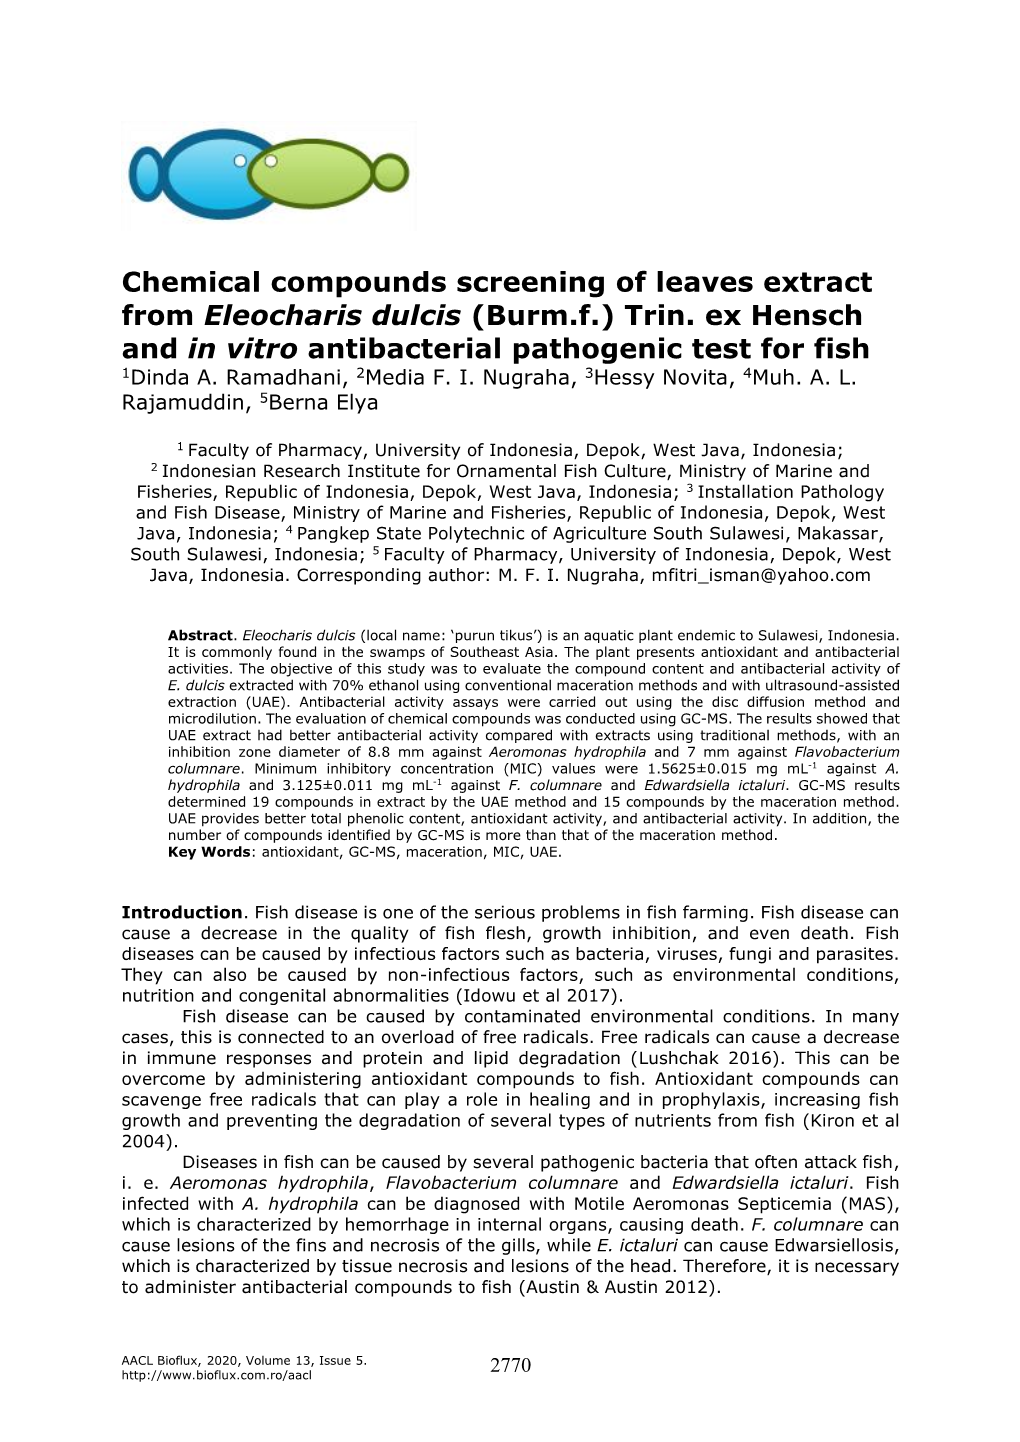 Chemical Compounds Screening of Leaves Extract from Eleocharis Dulcis (Burm.F.) Trin